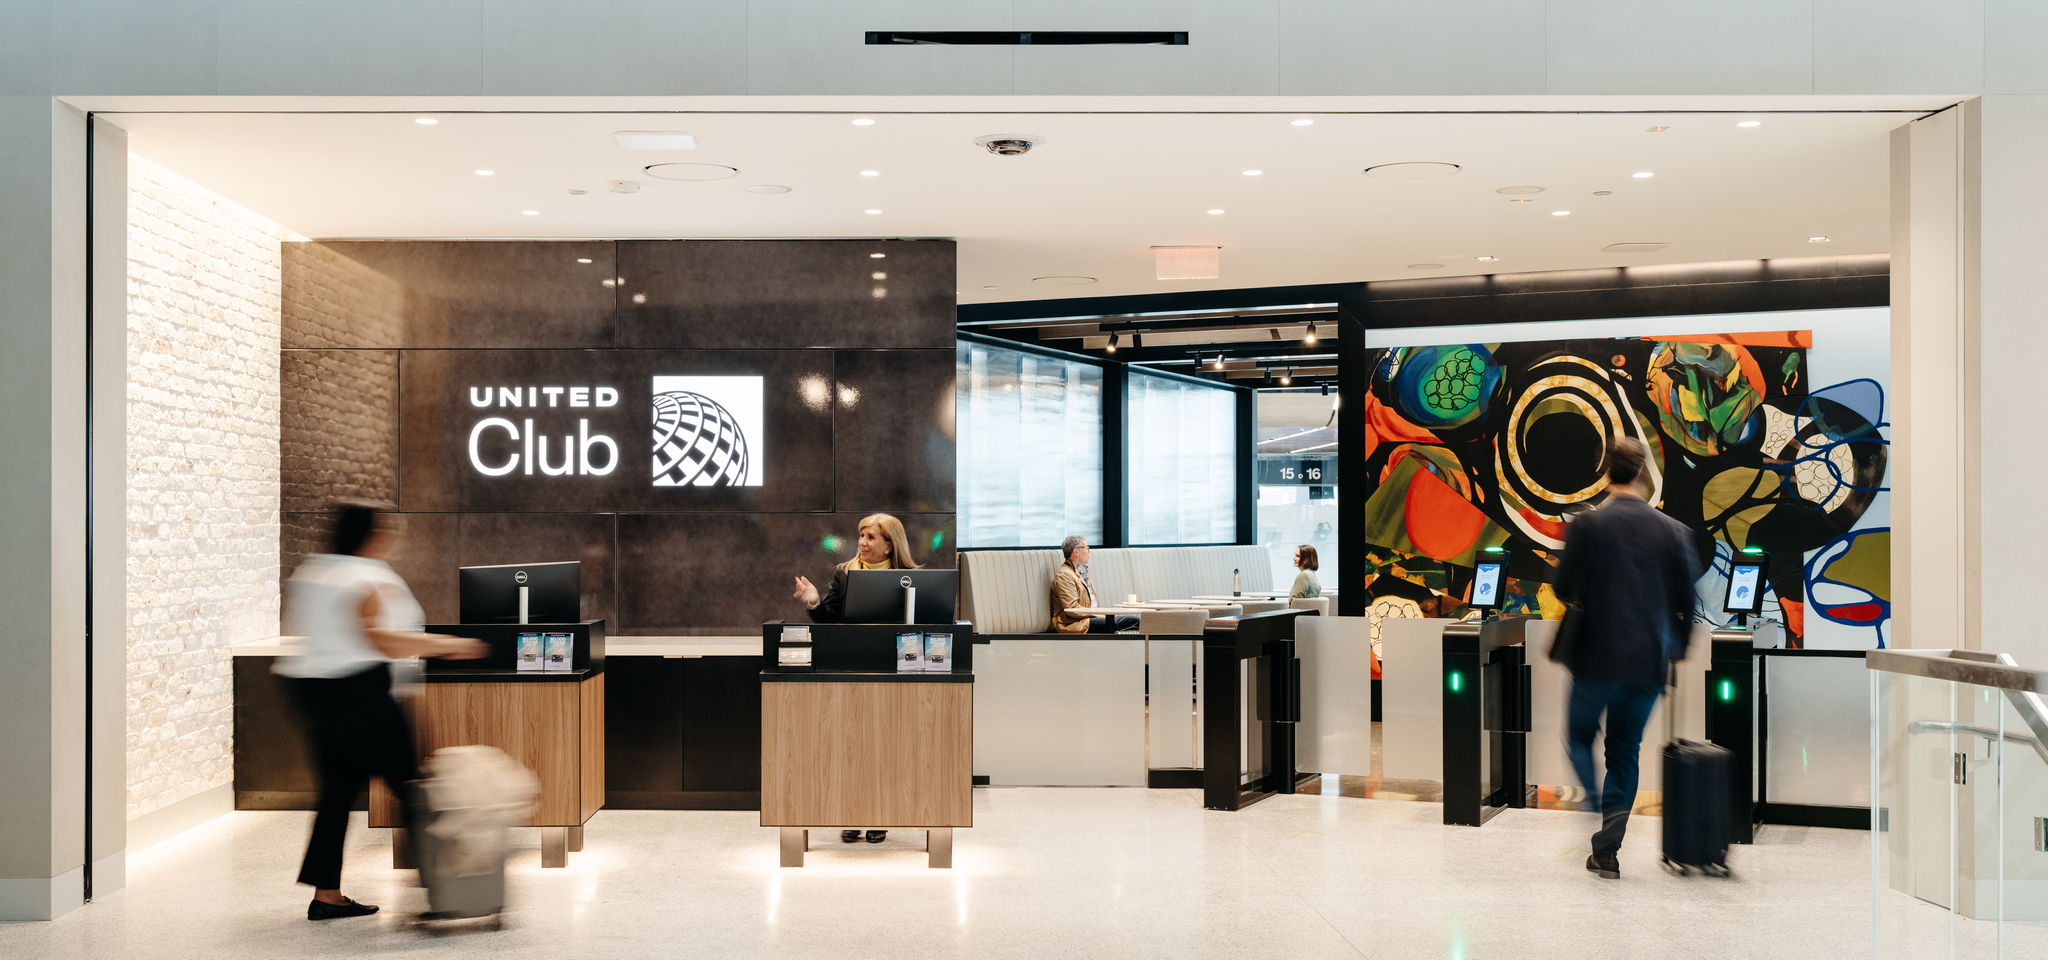 entrance area for United Club at EWR airport